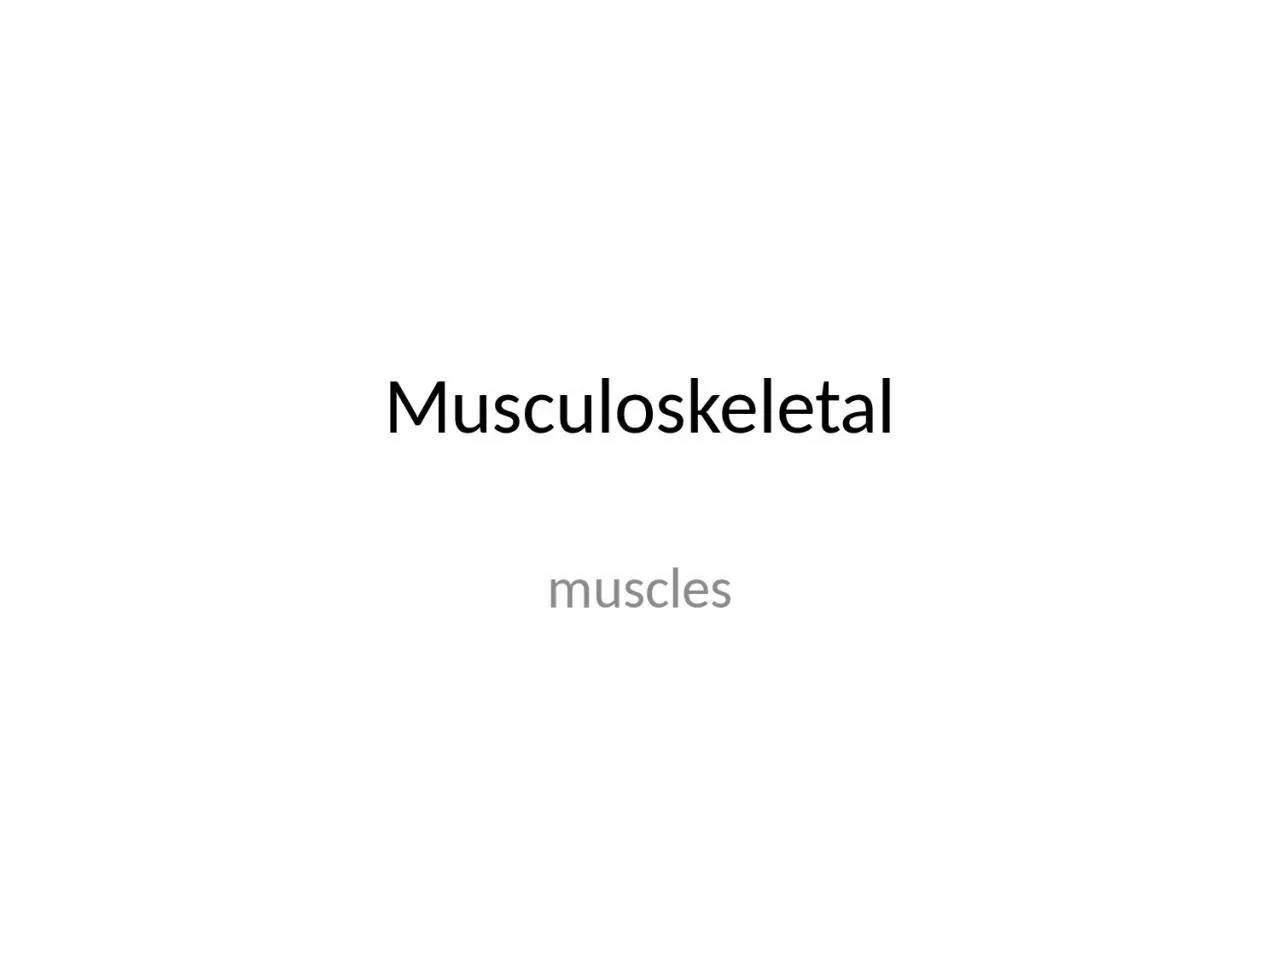 Musculoskeletal muscles 2